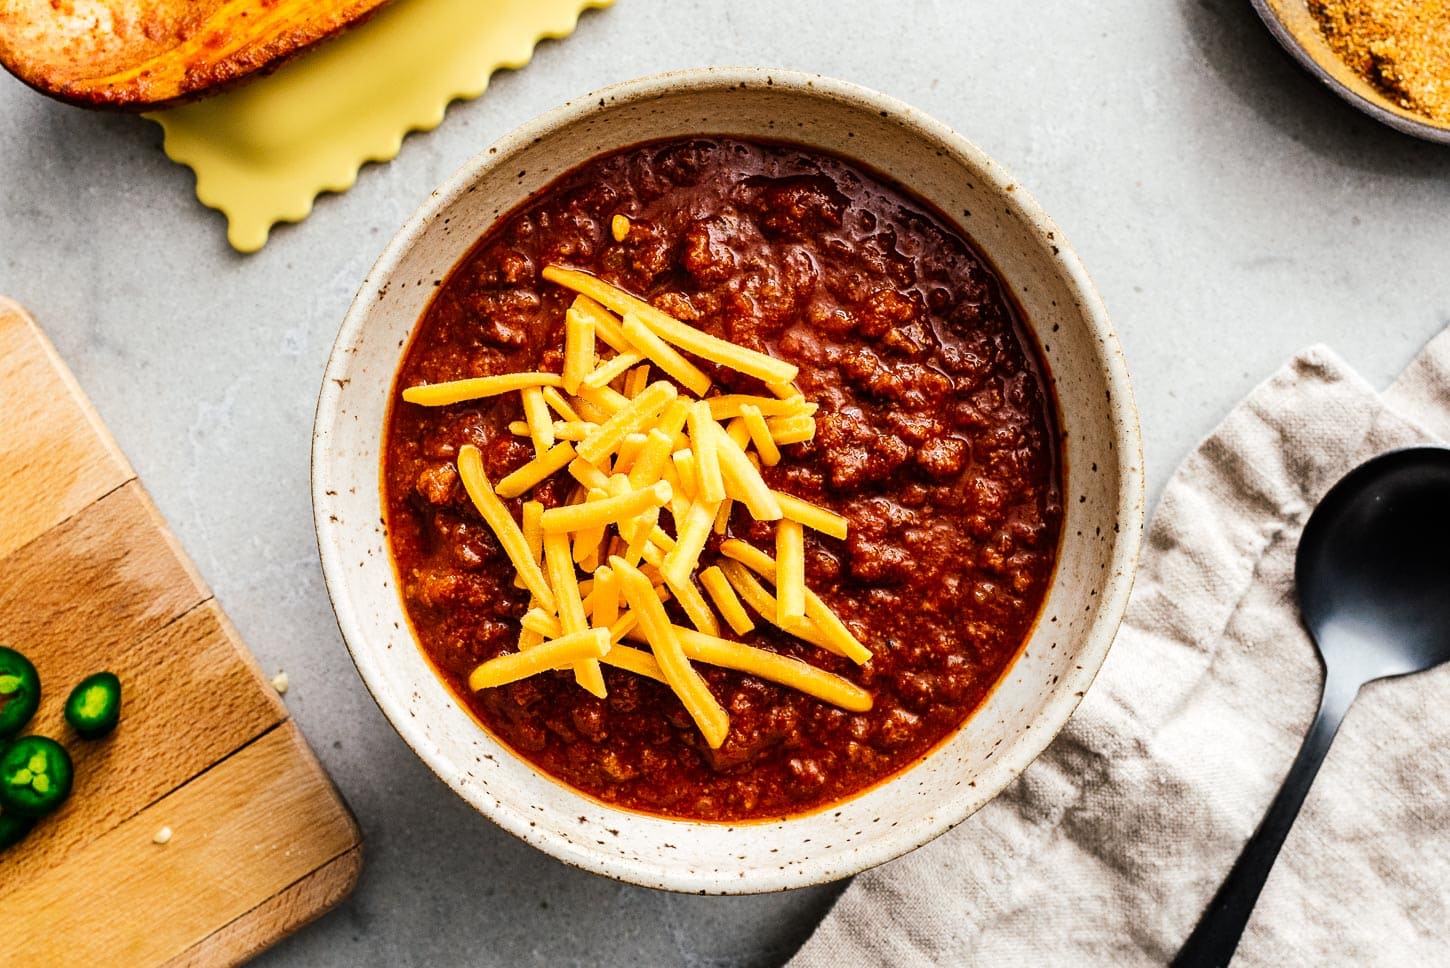 chili topped with cheddar cheese | www.iamafoodblog.com